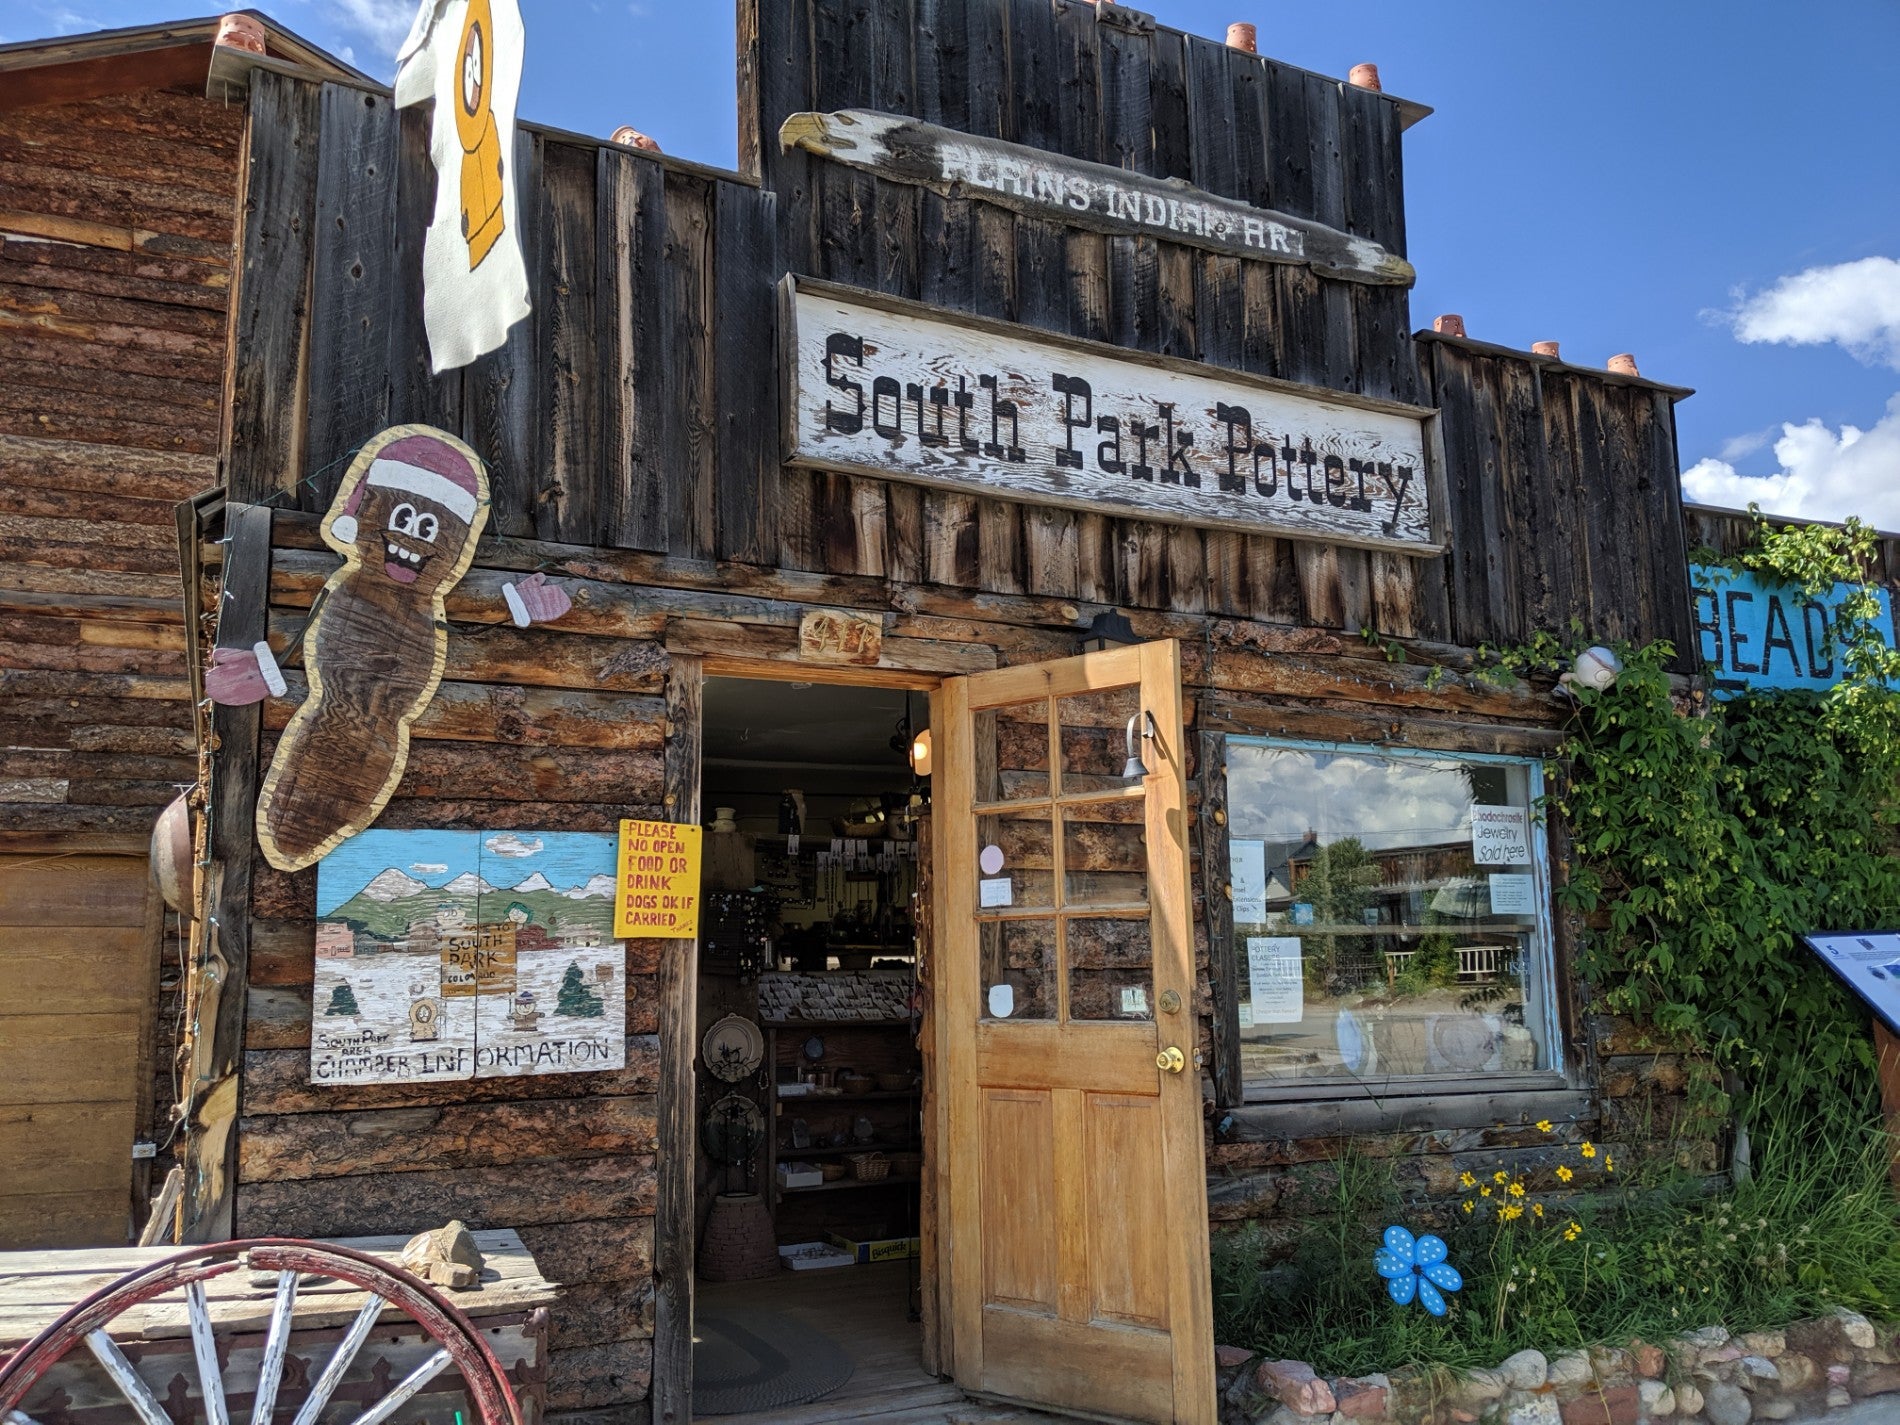 South Park Pottery - Local artist owned store with Pottery, Beads, Jewelry,  Stones, Antiques, South Park Collectables, and Much Much More in Fairplay,  Colorado